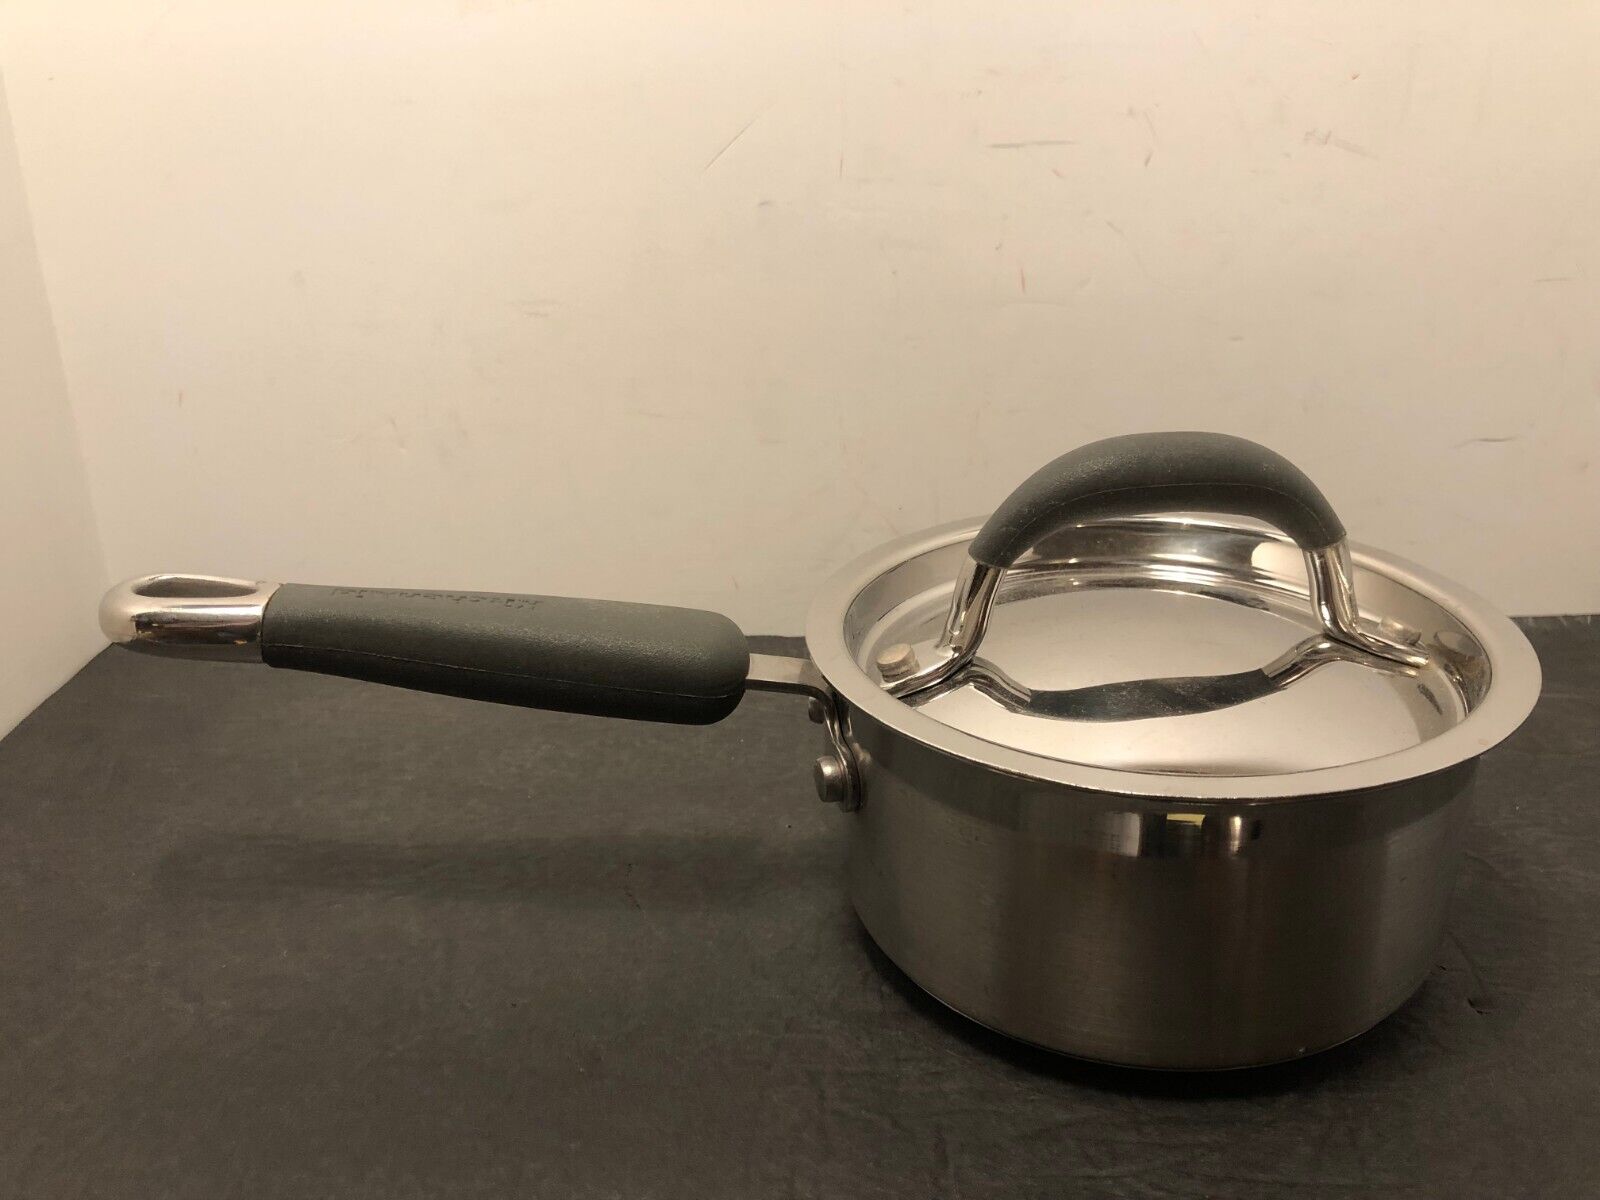 KitchenAid 1 Quart Stainless Steel Sauce Pan and Metal Lid Induction